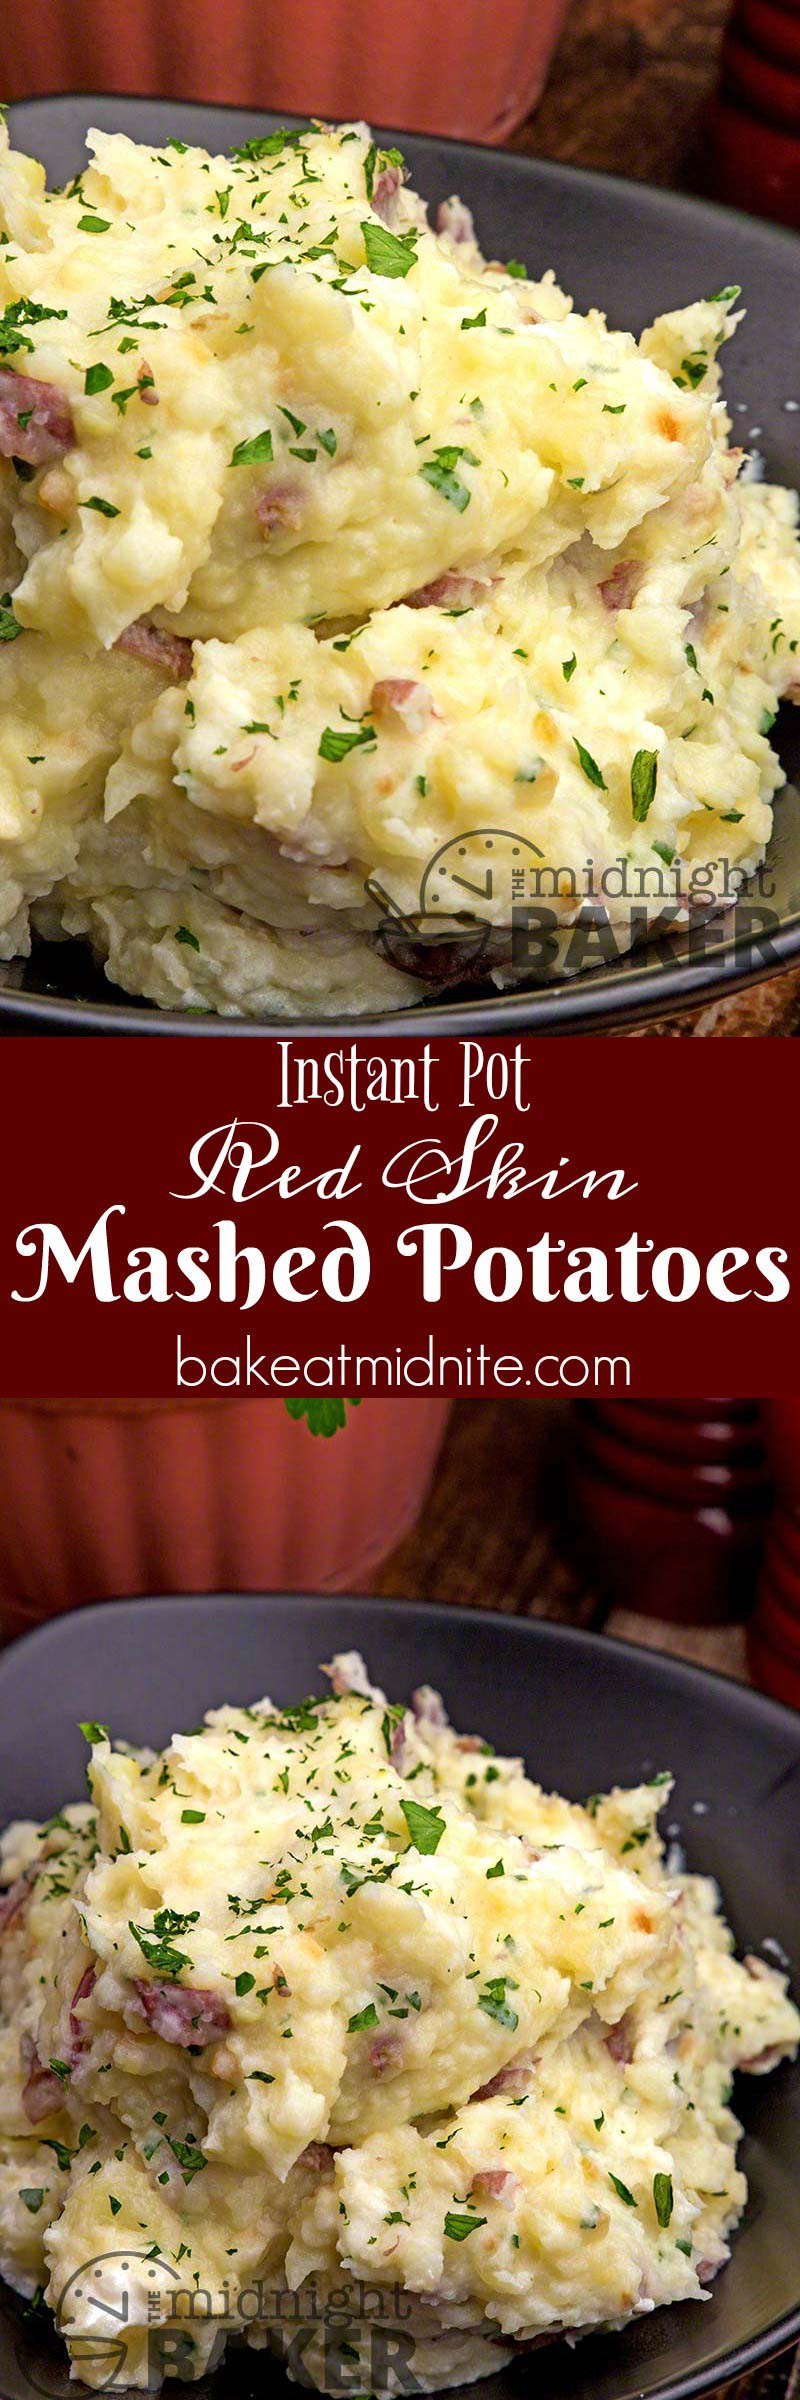 Mashed Potatoes Fiber
 Instant Pot Red Skinned Mashed Potatoes The Midnight Baker